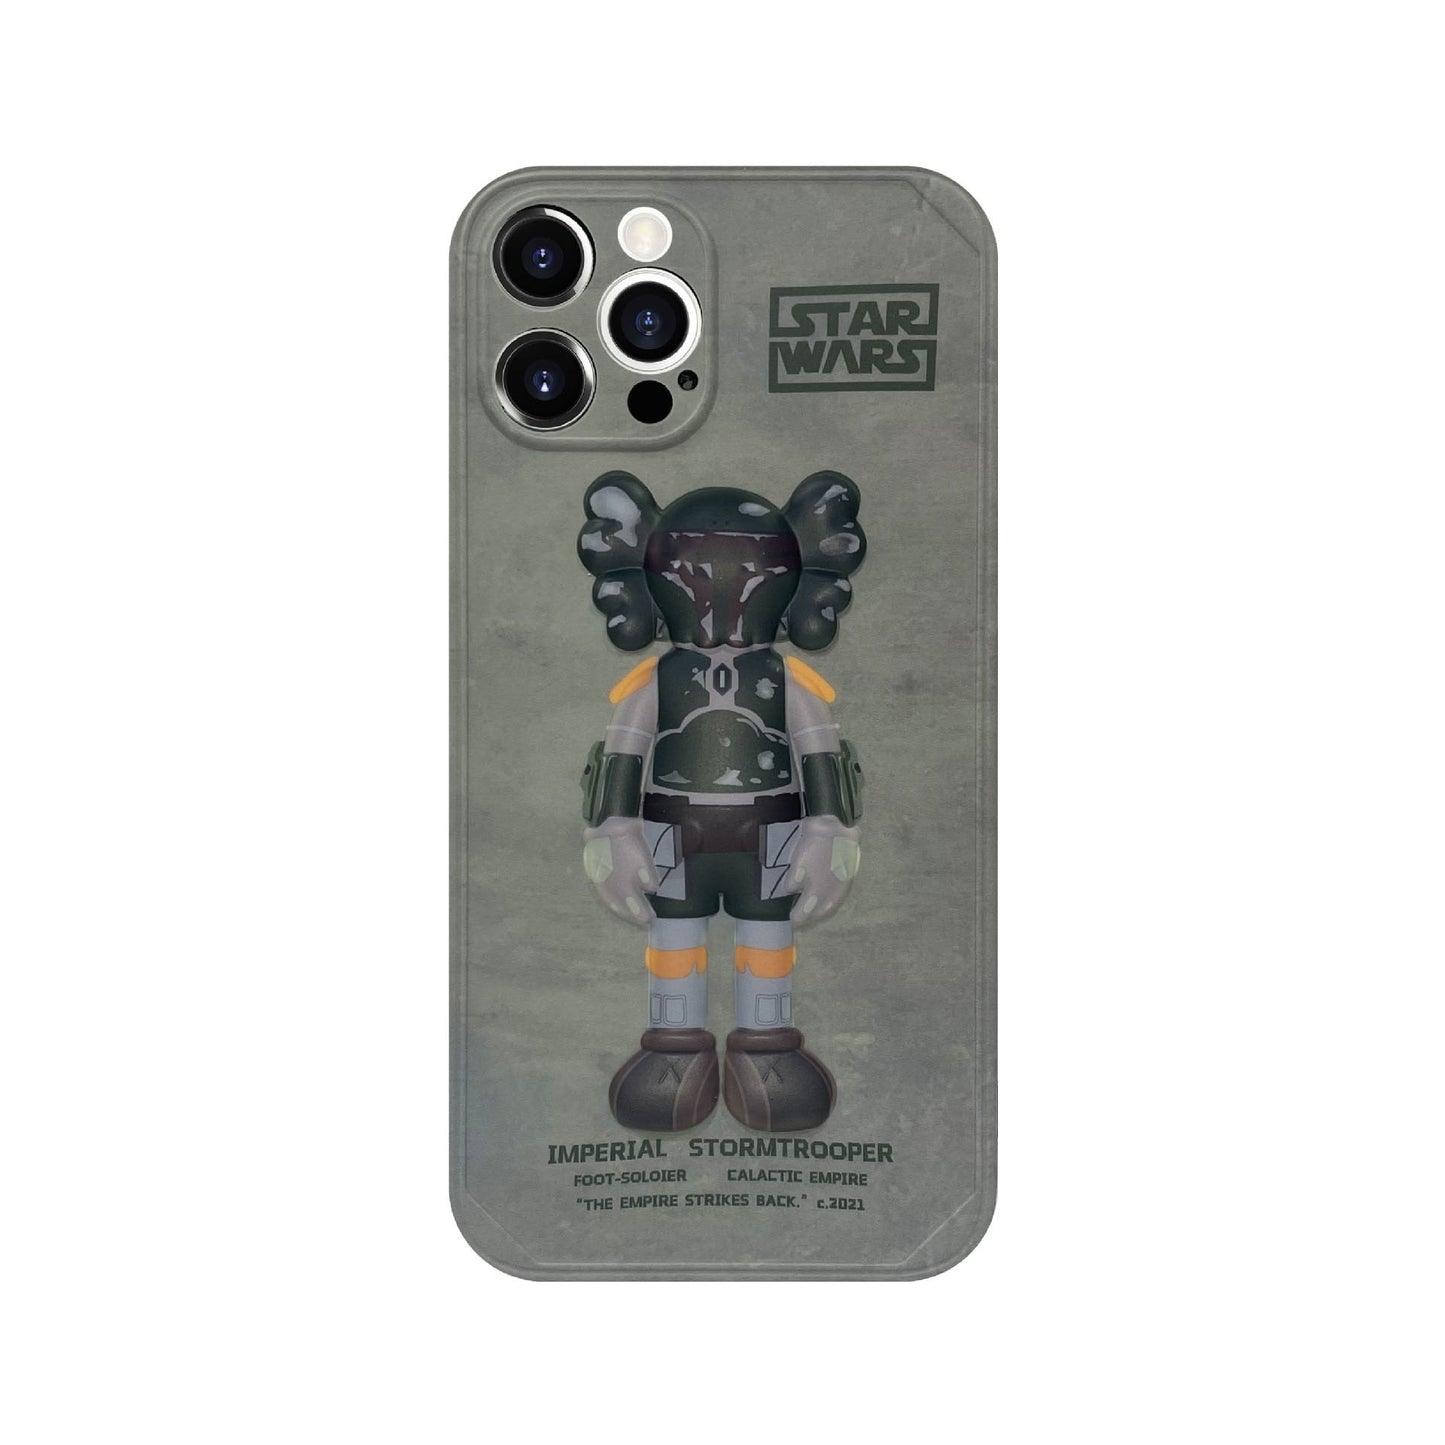 DISNEY Star Wars iPhone Cases (Variants Available) (Set-2)